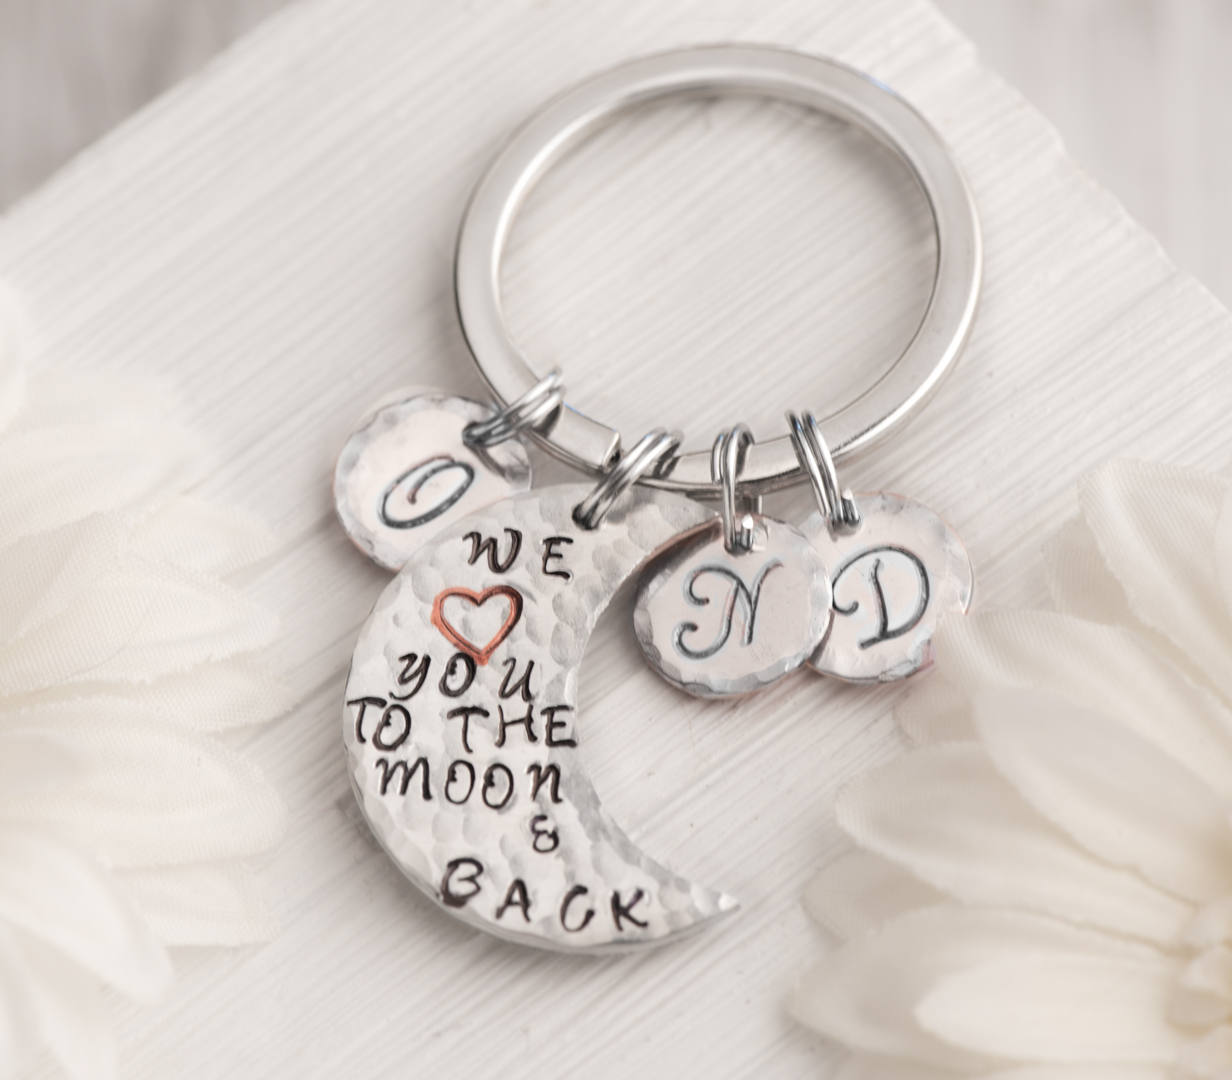 Hand Stamped Custom Engraved Keychain, Mothers Day Keychain, Gift For Mom Of 5 Kids, We Love You Engrave Keychain, The Moon And Back Gift, Mom